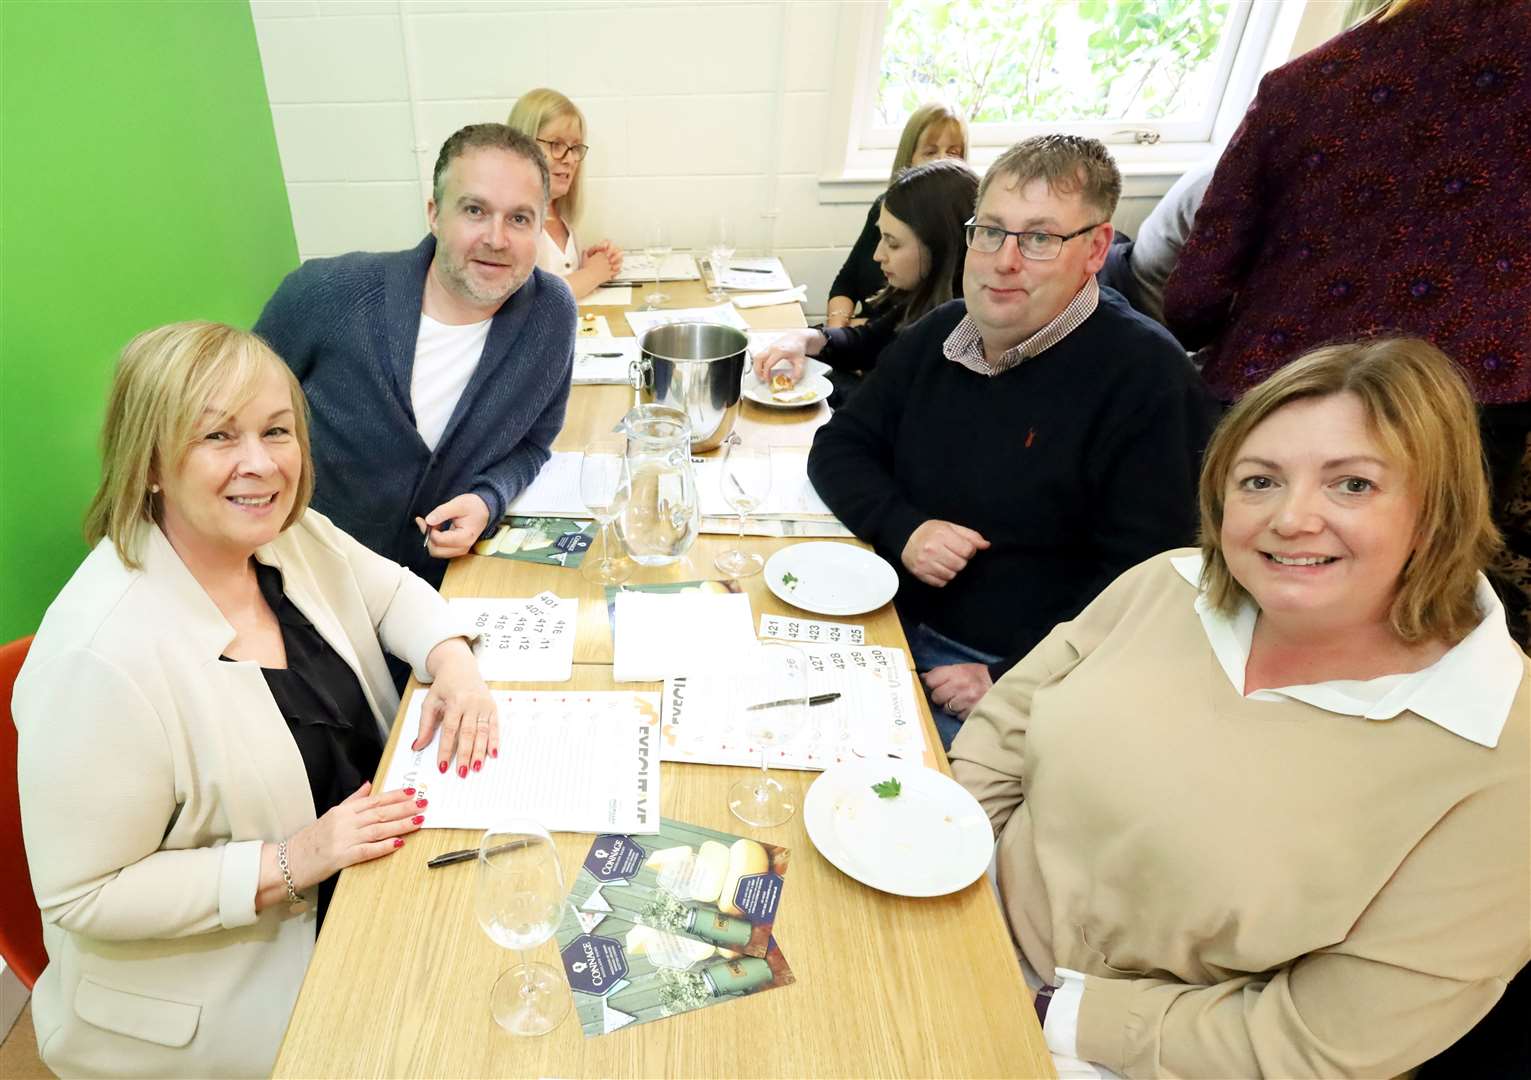 Cheese and wine night at the Inverness Botanic Garden Centre to raise money for Macmillan Cancer Support: Alison and Steve Barron, Michael and Emma Macdonald. Picture: James Mackenzie.